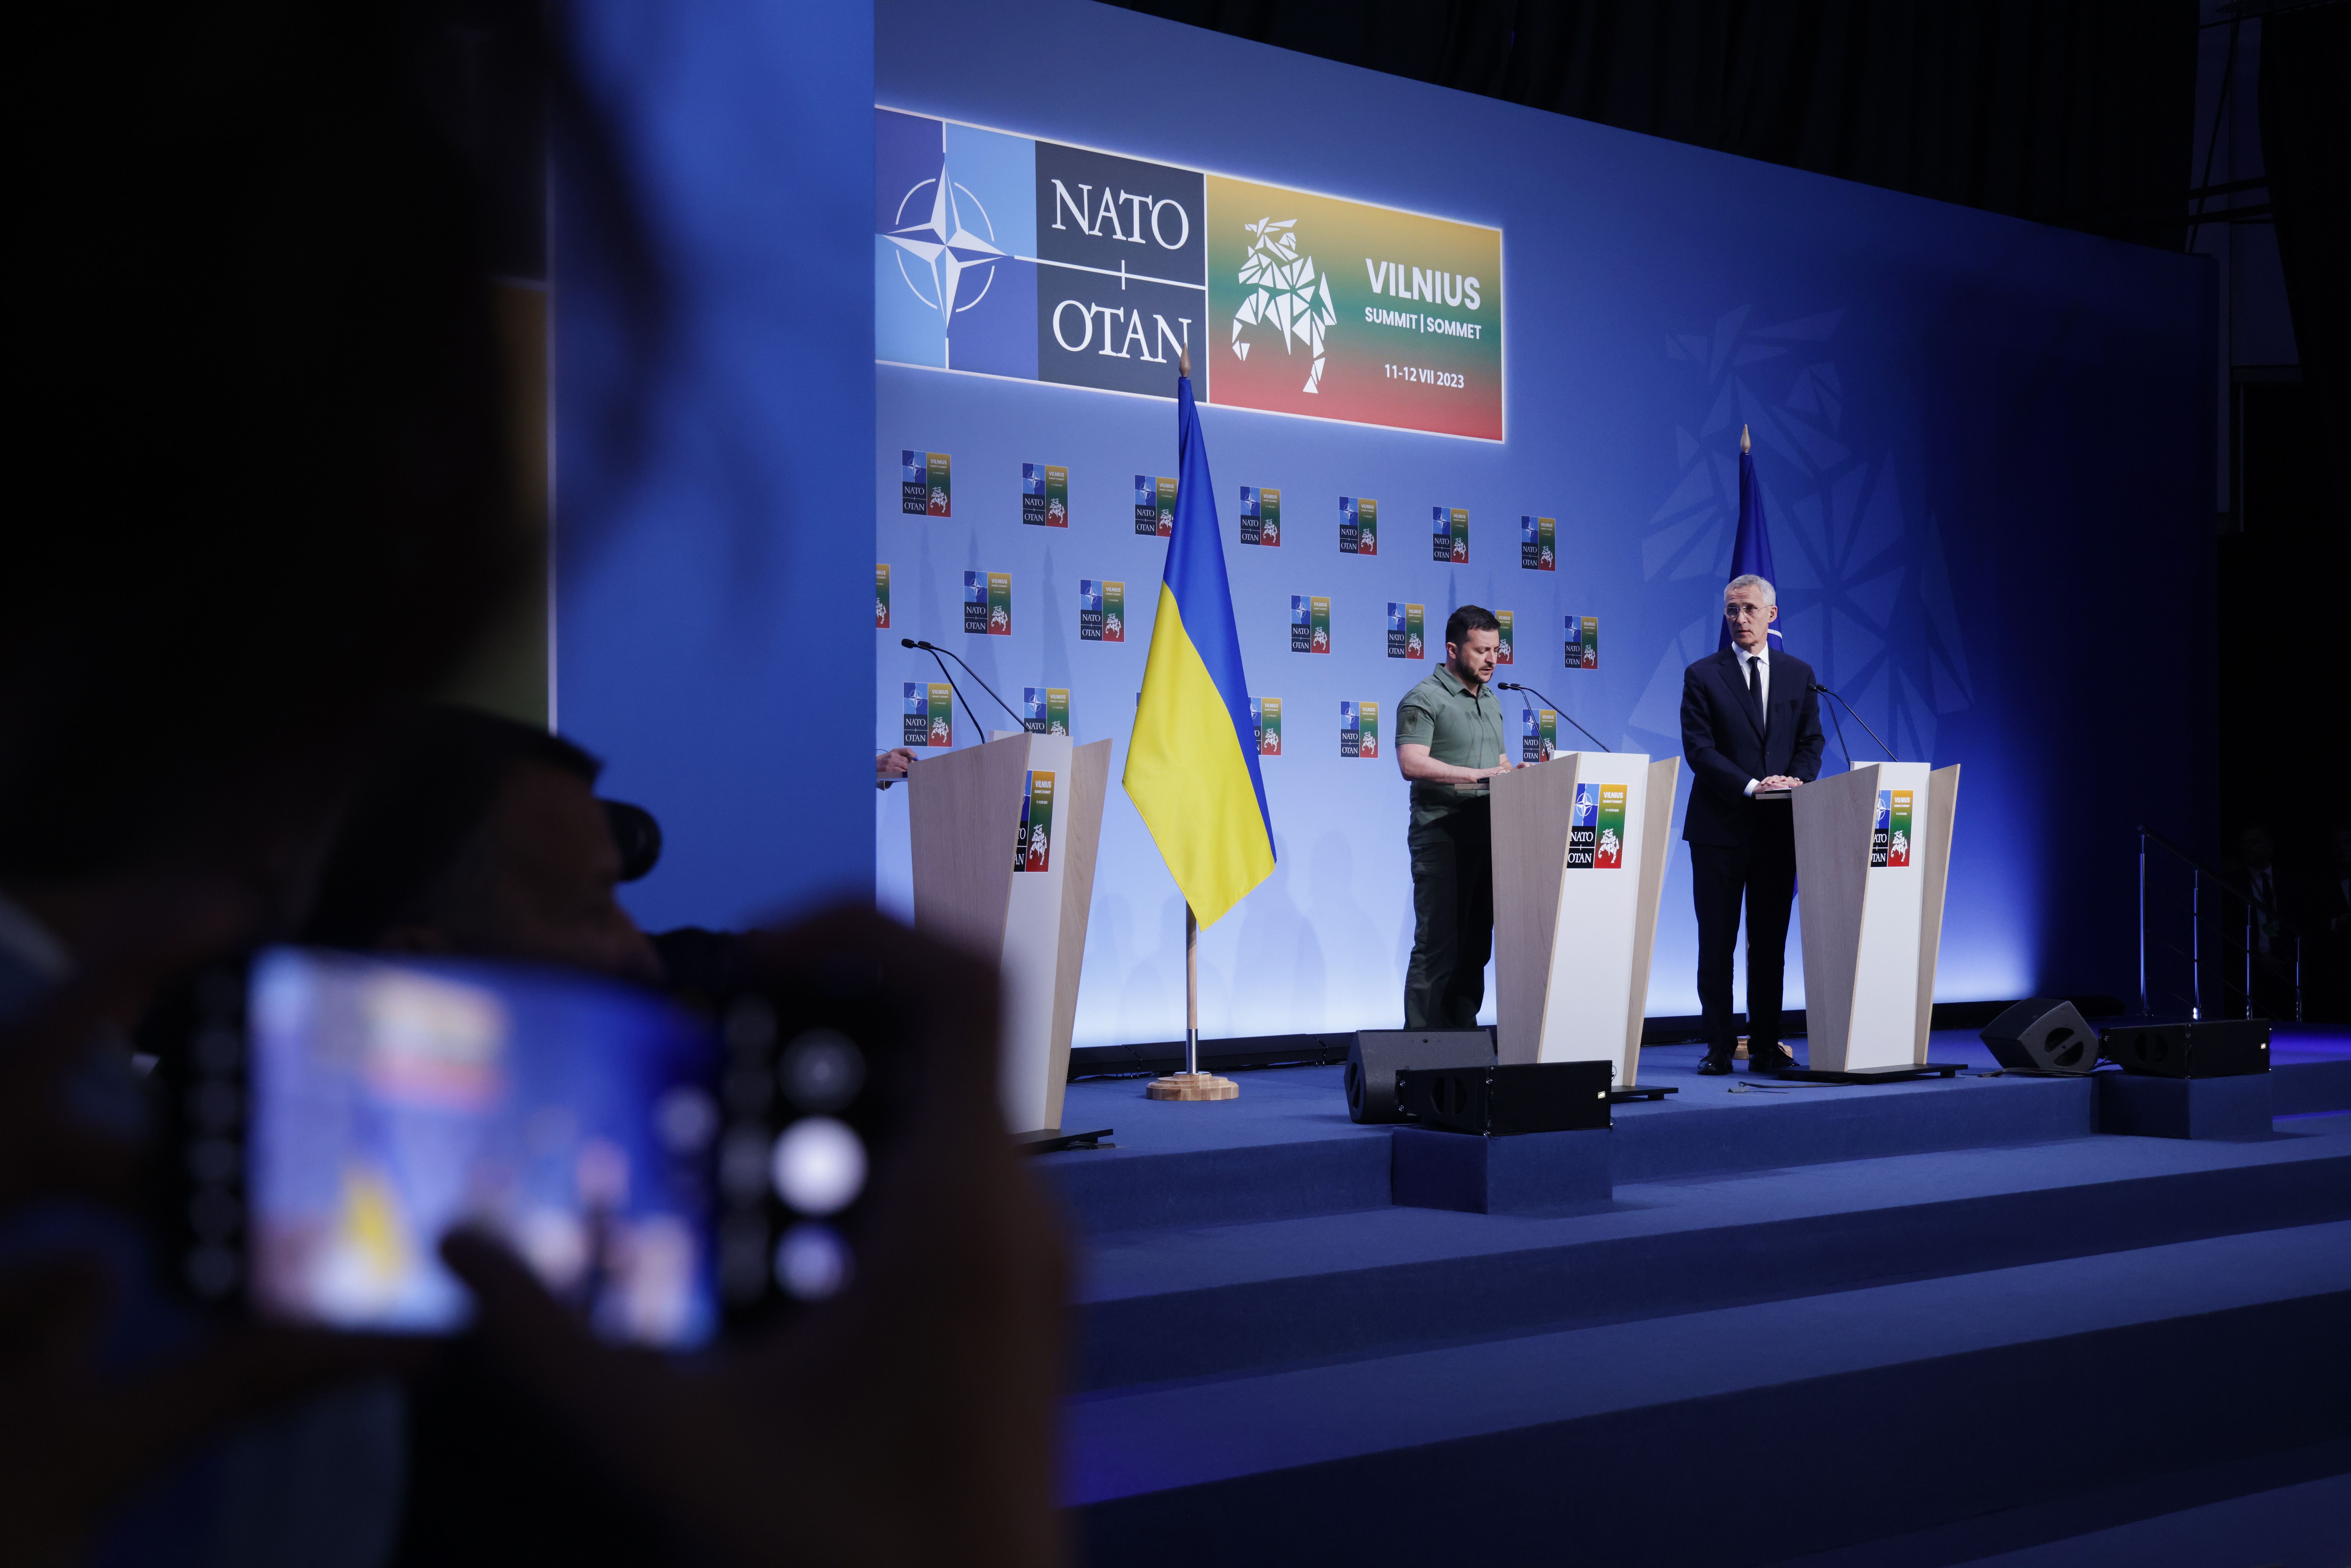 Ukrainian President Volodymyr Zelensky (C) and NATO Secretary General Jens Stoltenberg speak to the media on the second day of the 2023 NATO Summit on July 12, 2023 in Vilnius, Lithuania. The summit is bringing together NATO members and partner countries heads of state from July 11-12 to chart the alliance's future, with Sweden's application for membership and Russia's ongoing war in Ukraine as major topics on the summit agenda. (Photo by Sean Gallup/Getty Images)